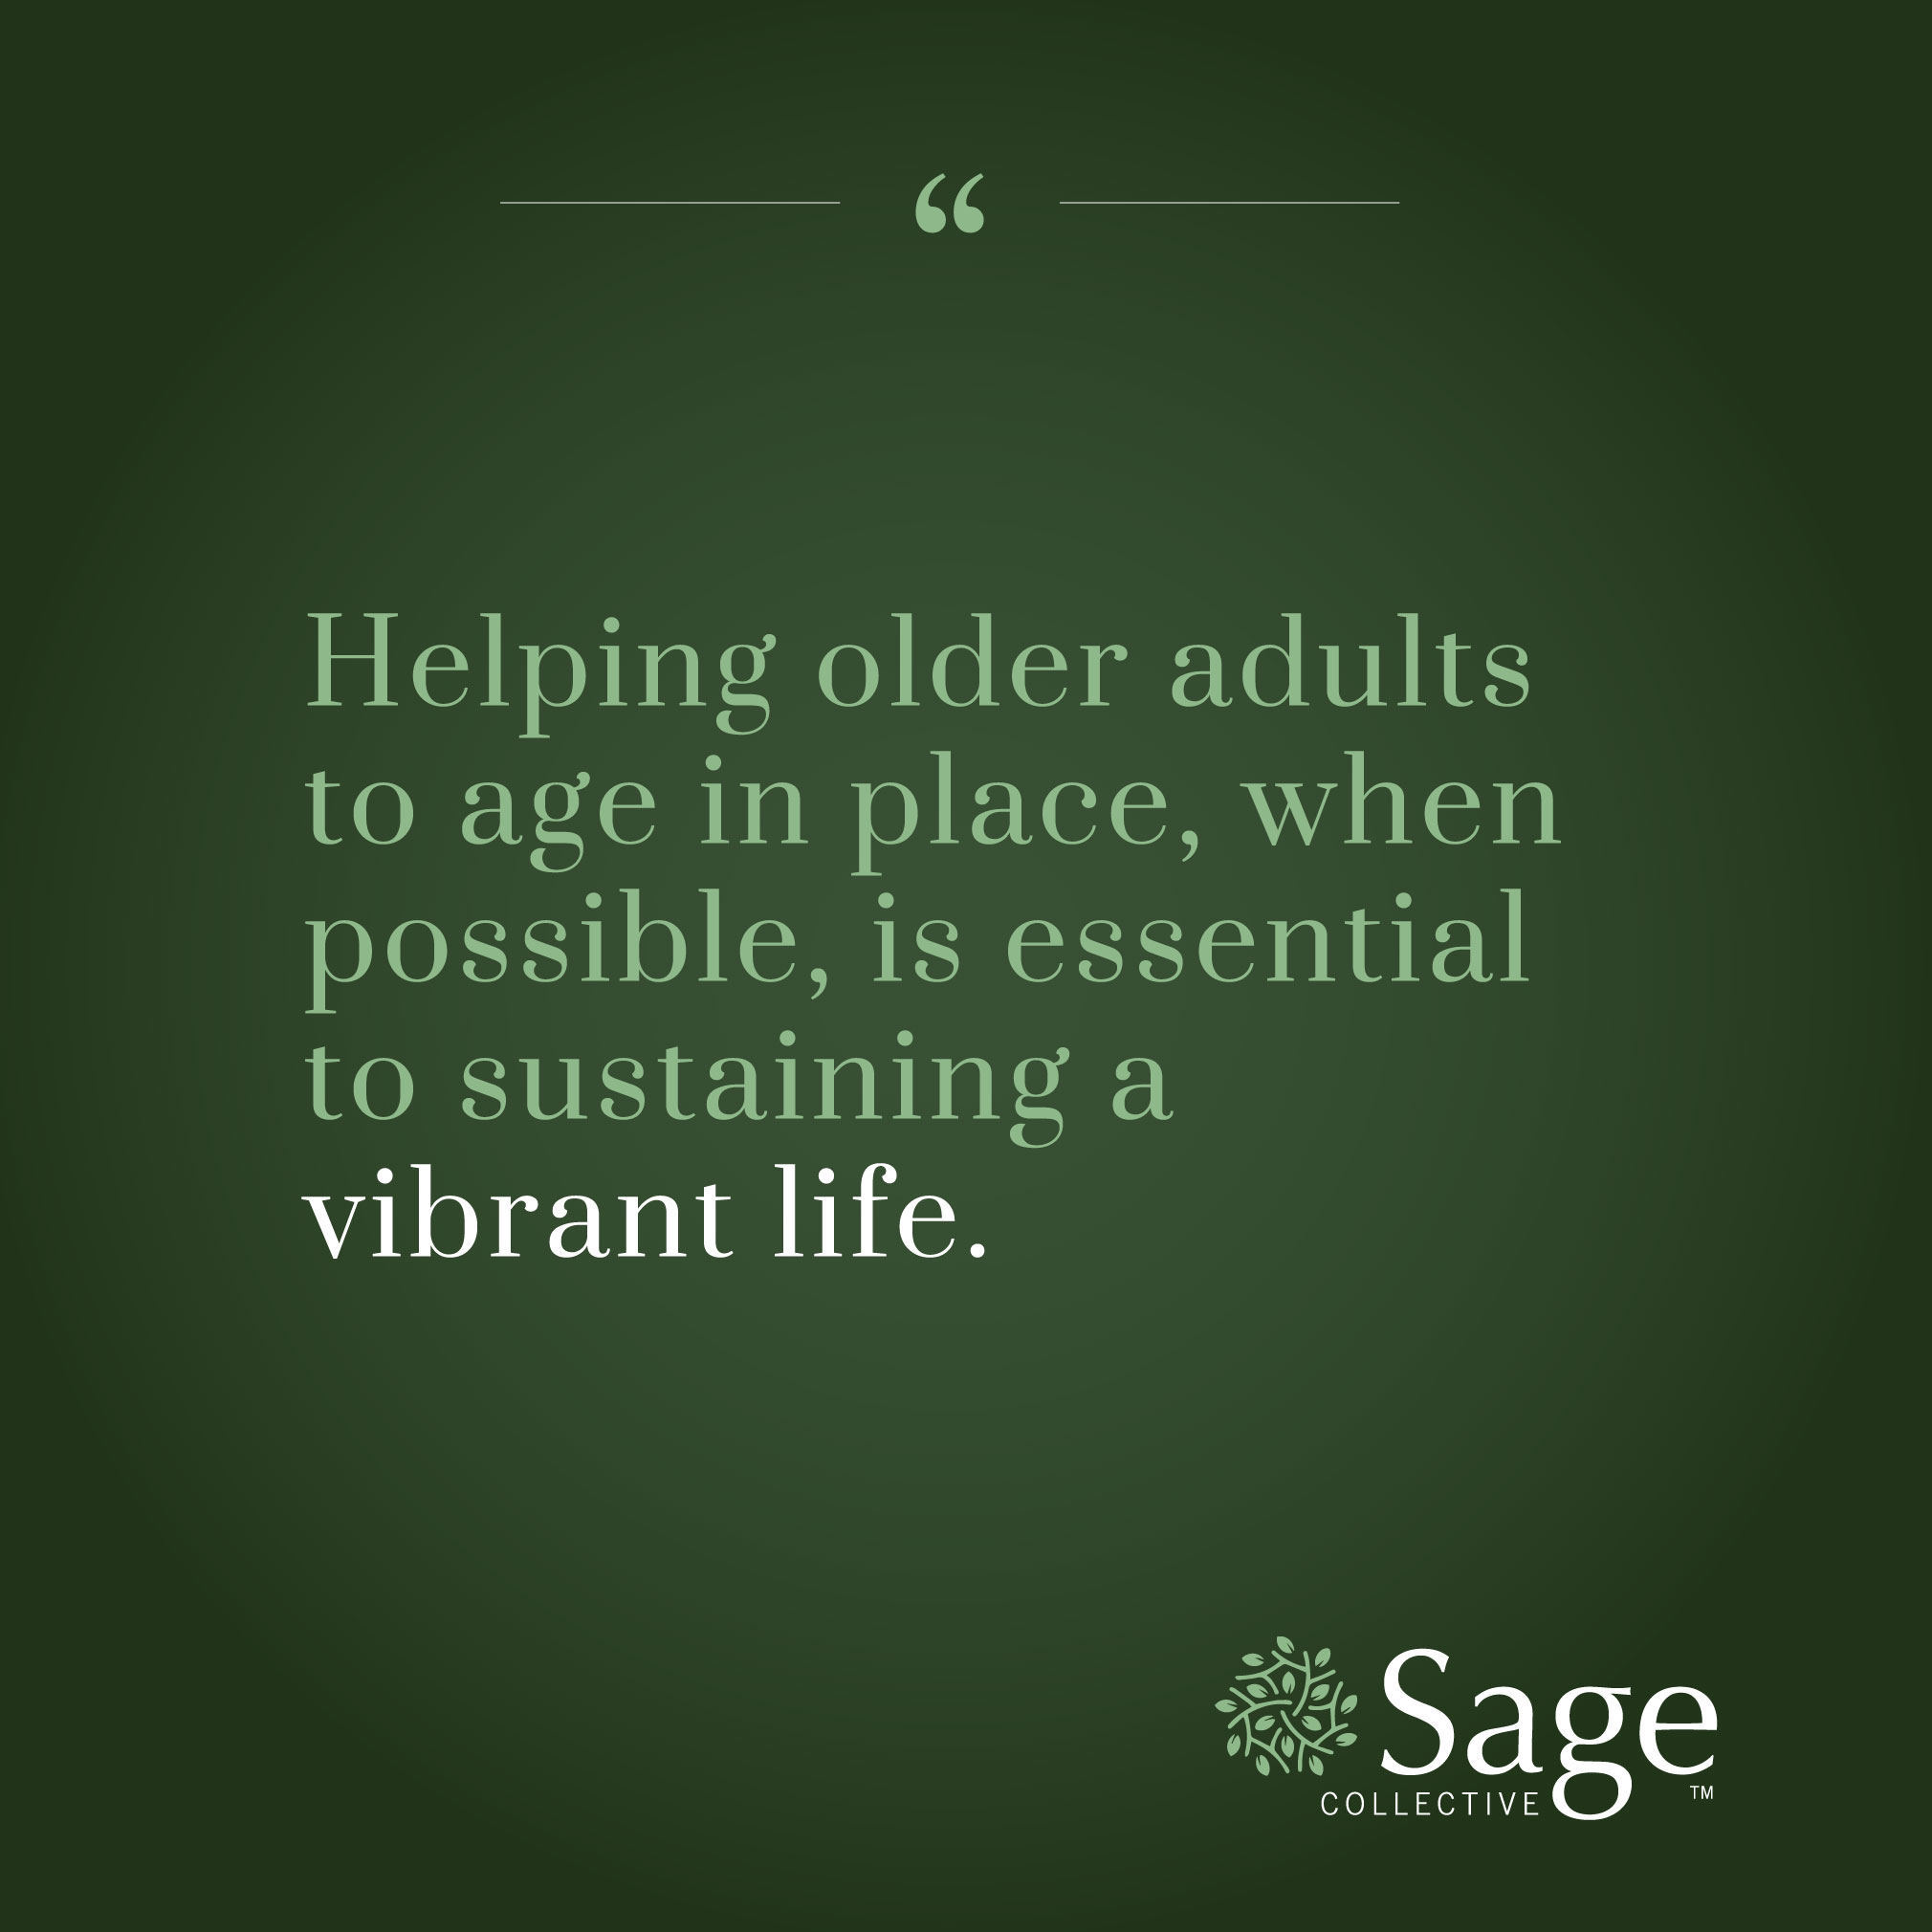 Text over a green background, with quotation marks at the top and the Sage Collective logo at the bottom. Text reads: Helping older adults to age in place, when possible, is essential to sustaining a vibrant life.